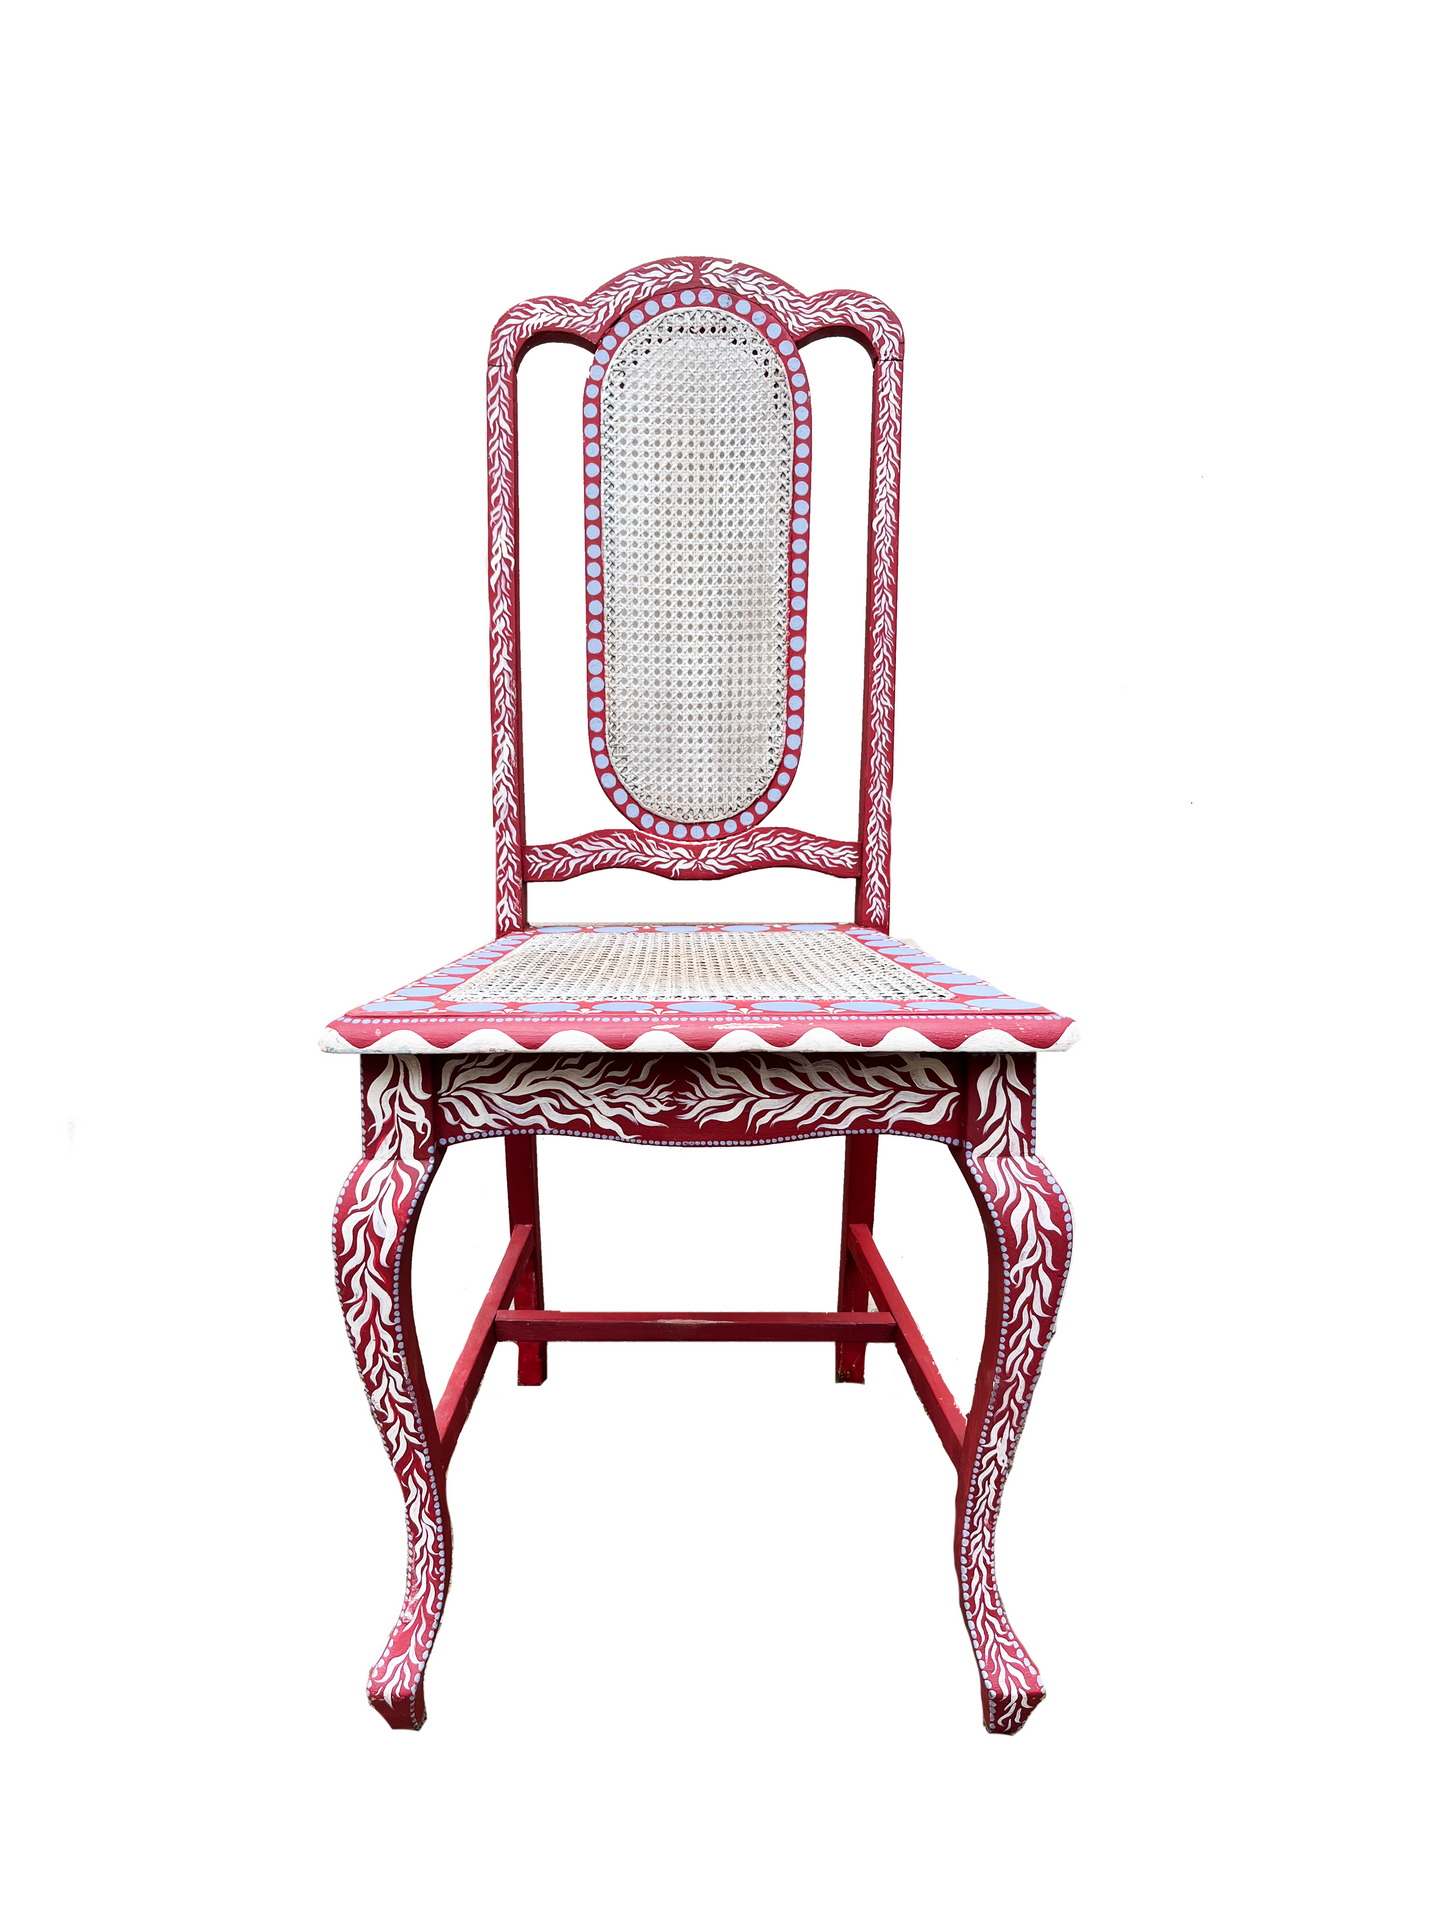 Hand Painted Decorative Chair